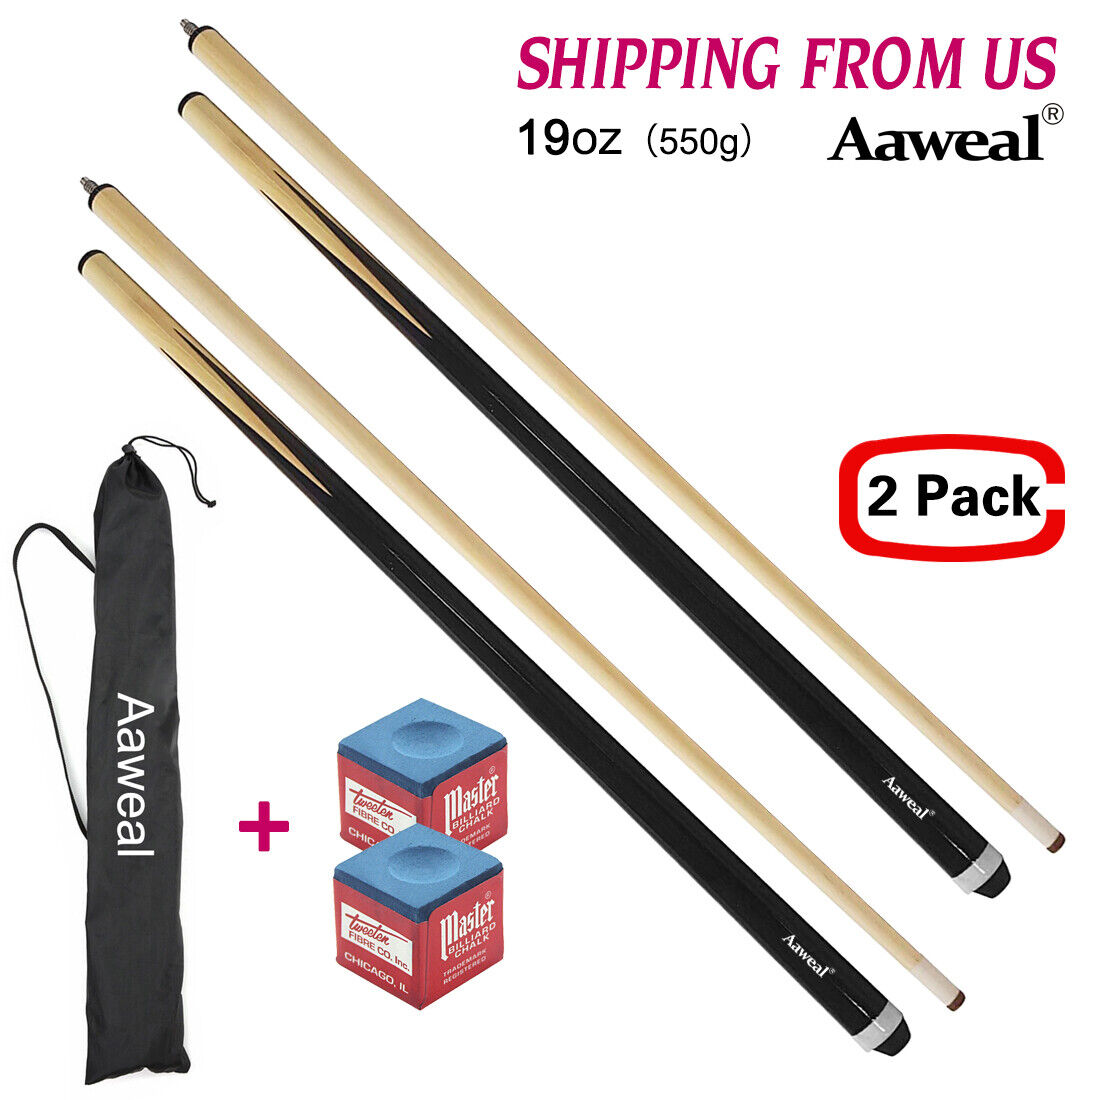 57"  WOODEN Billiard Pool Cue Stick 19oz SNOOKER Adult Home Sport Aaweal Does Not Apply